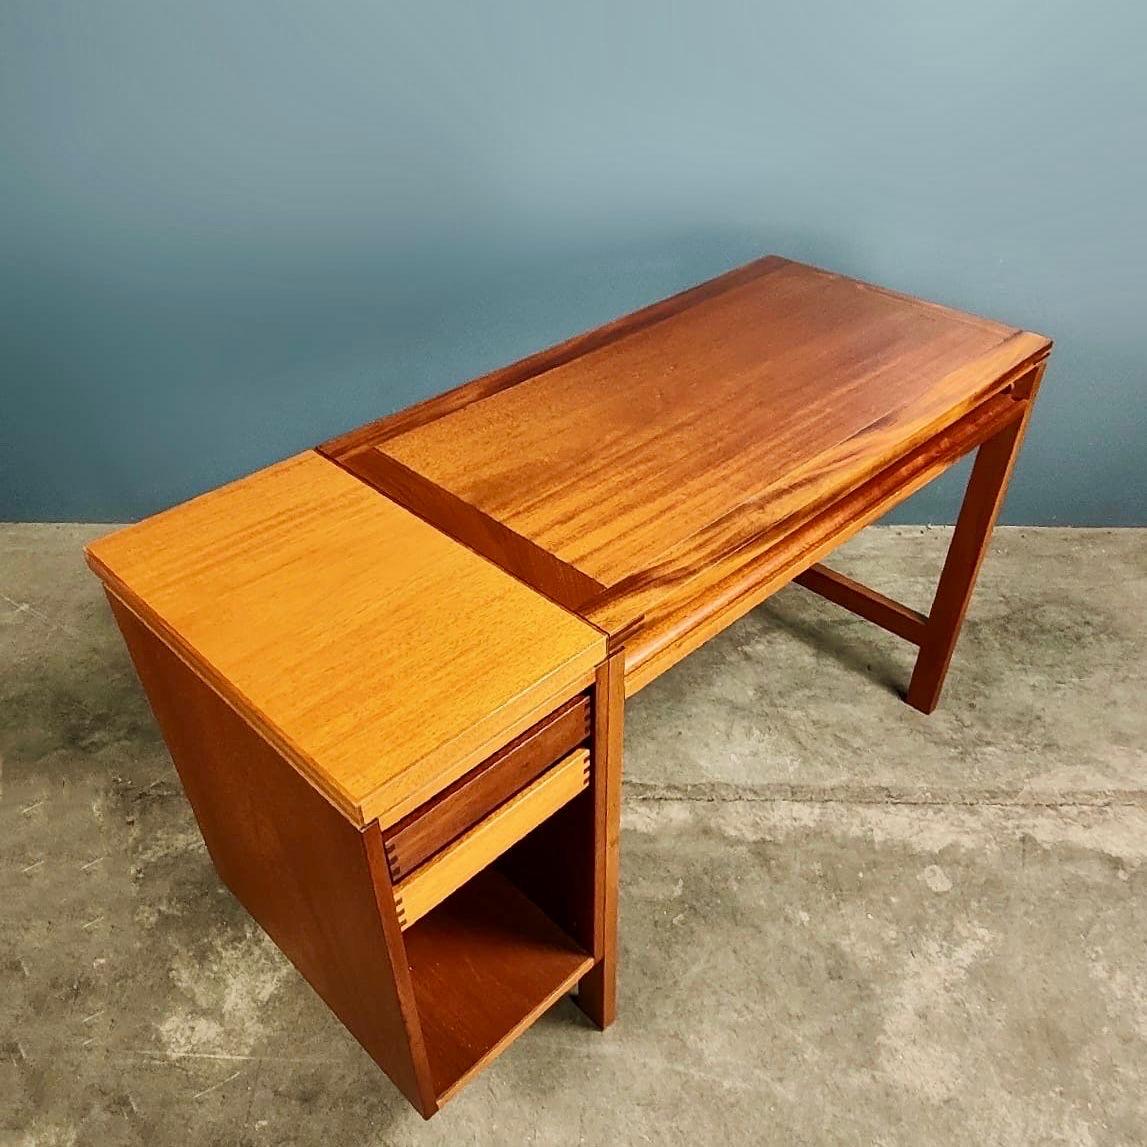 New Stock ✅

Danish Desk Christian Peter Hvidt for Søborg Møbelfabrik Mid Century Vintage Retro MCM

Extremely elegant, solid desk with exquisite joinery designed in the late 60s/early 70s by Peter Christian Hvidt for Søborg Møbelfabrik, a renowned